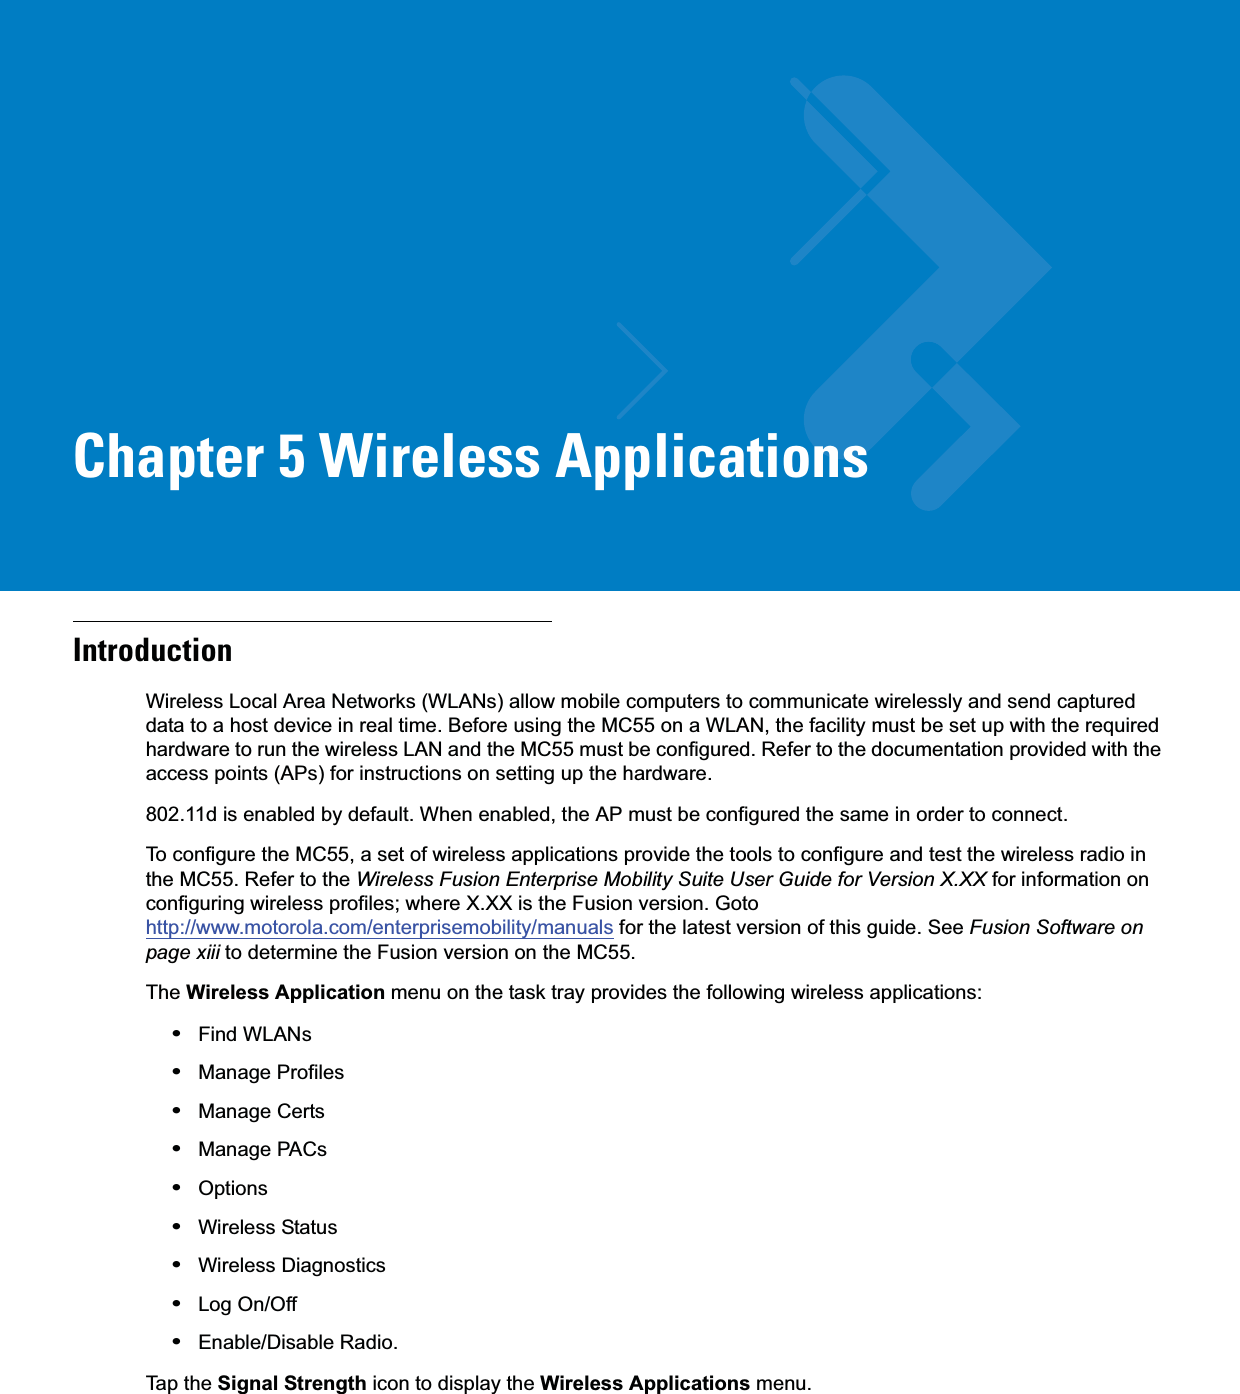 Chapter 5 Wireless ApplicationsIntroductionWireless Local Area Networks (WLANs) allow mobile computers to communicate wirelessly and send captured data to a host device in real time. Before using the MC55 on a WLAN, the facility must be set up with the required hardware to run the wireless LAN and the MC55 must be configured. Refer to the documentation provided with the access points (APs) for instructions on setting up the hardware.802.11d is enabled by default. When enabled, the AP must be configured the same in order to connect.To configure the MC55, a set of wireless applications provide the tools to configure and test the wireless radio in the MC55. Refer to the Wireless Fusion Enterprise Mobility Suite User Guide for Version X.XX for information on configuring wireless profiles; where X.XX is the Fusion version. Goto http://www.motorola.com/enterprisemobility/manuals for the latest version of this guide. See Fusion Software on page xiii to determine the Fusion version on the MC55.The Wireless Application menu on the task tray provides the following wireless applications:•Find WLANs•Manage Profiles•Manage Certs•Manage PACs•Options•Wireless Status•Wireless Diagnostics•Log On/Off•Enable/Disable Radio.Tap the Signal Strength icon to display the Wireless Applications menu.